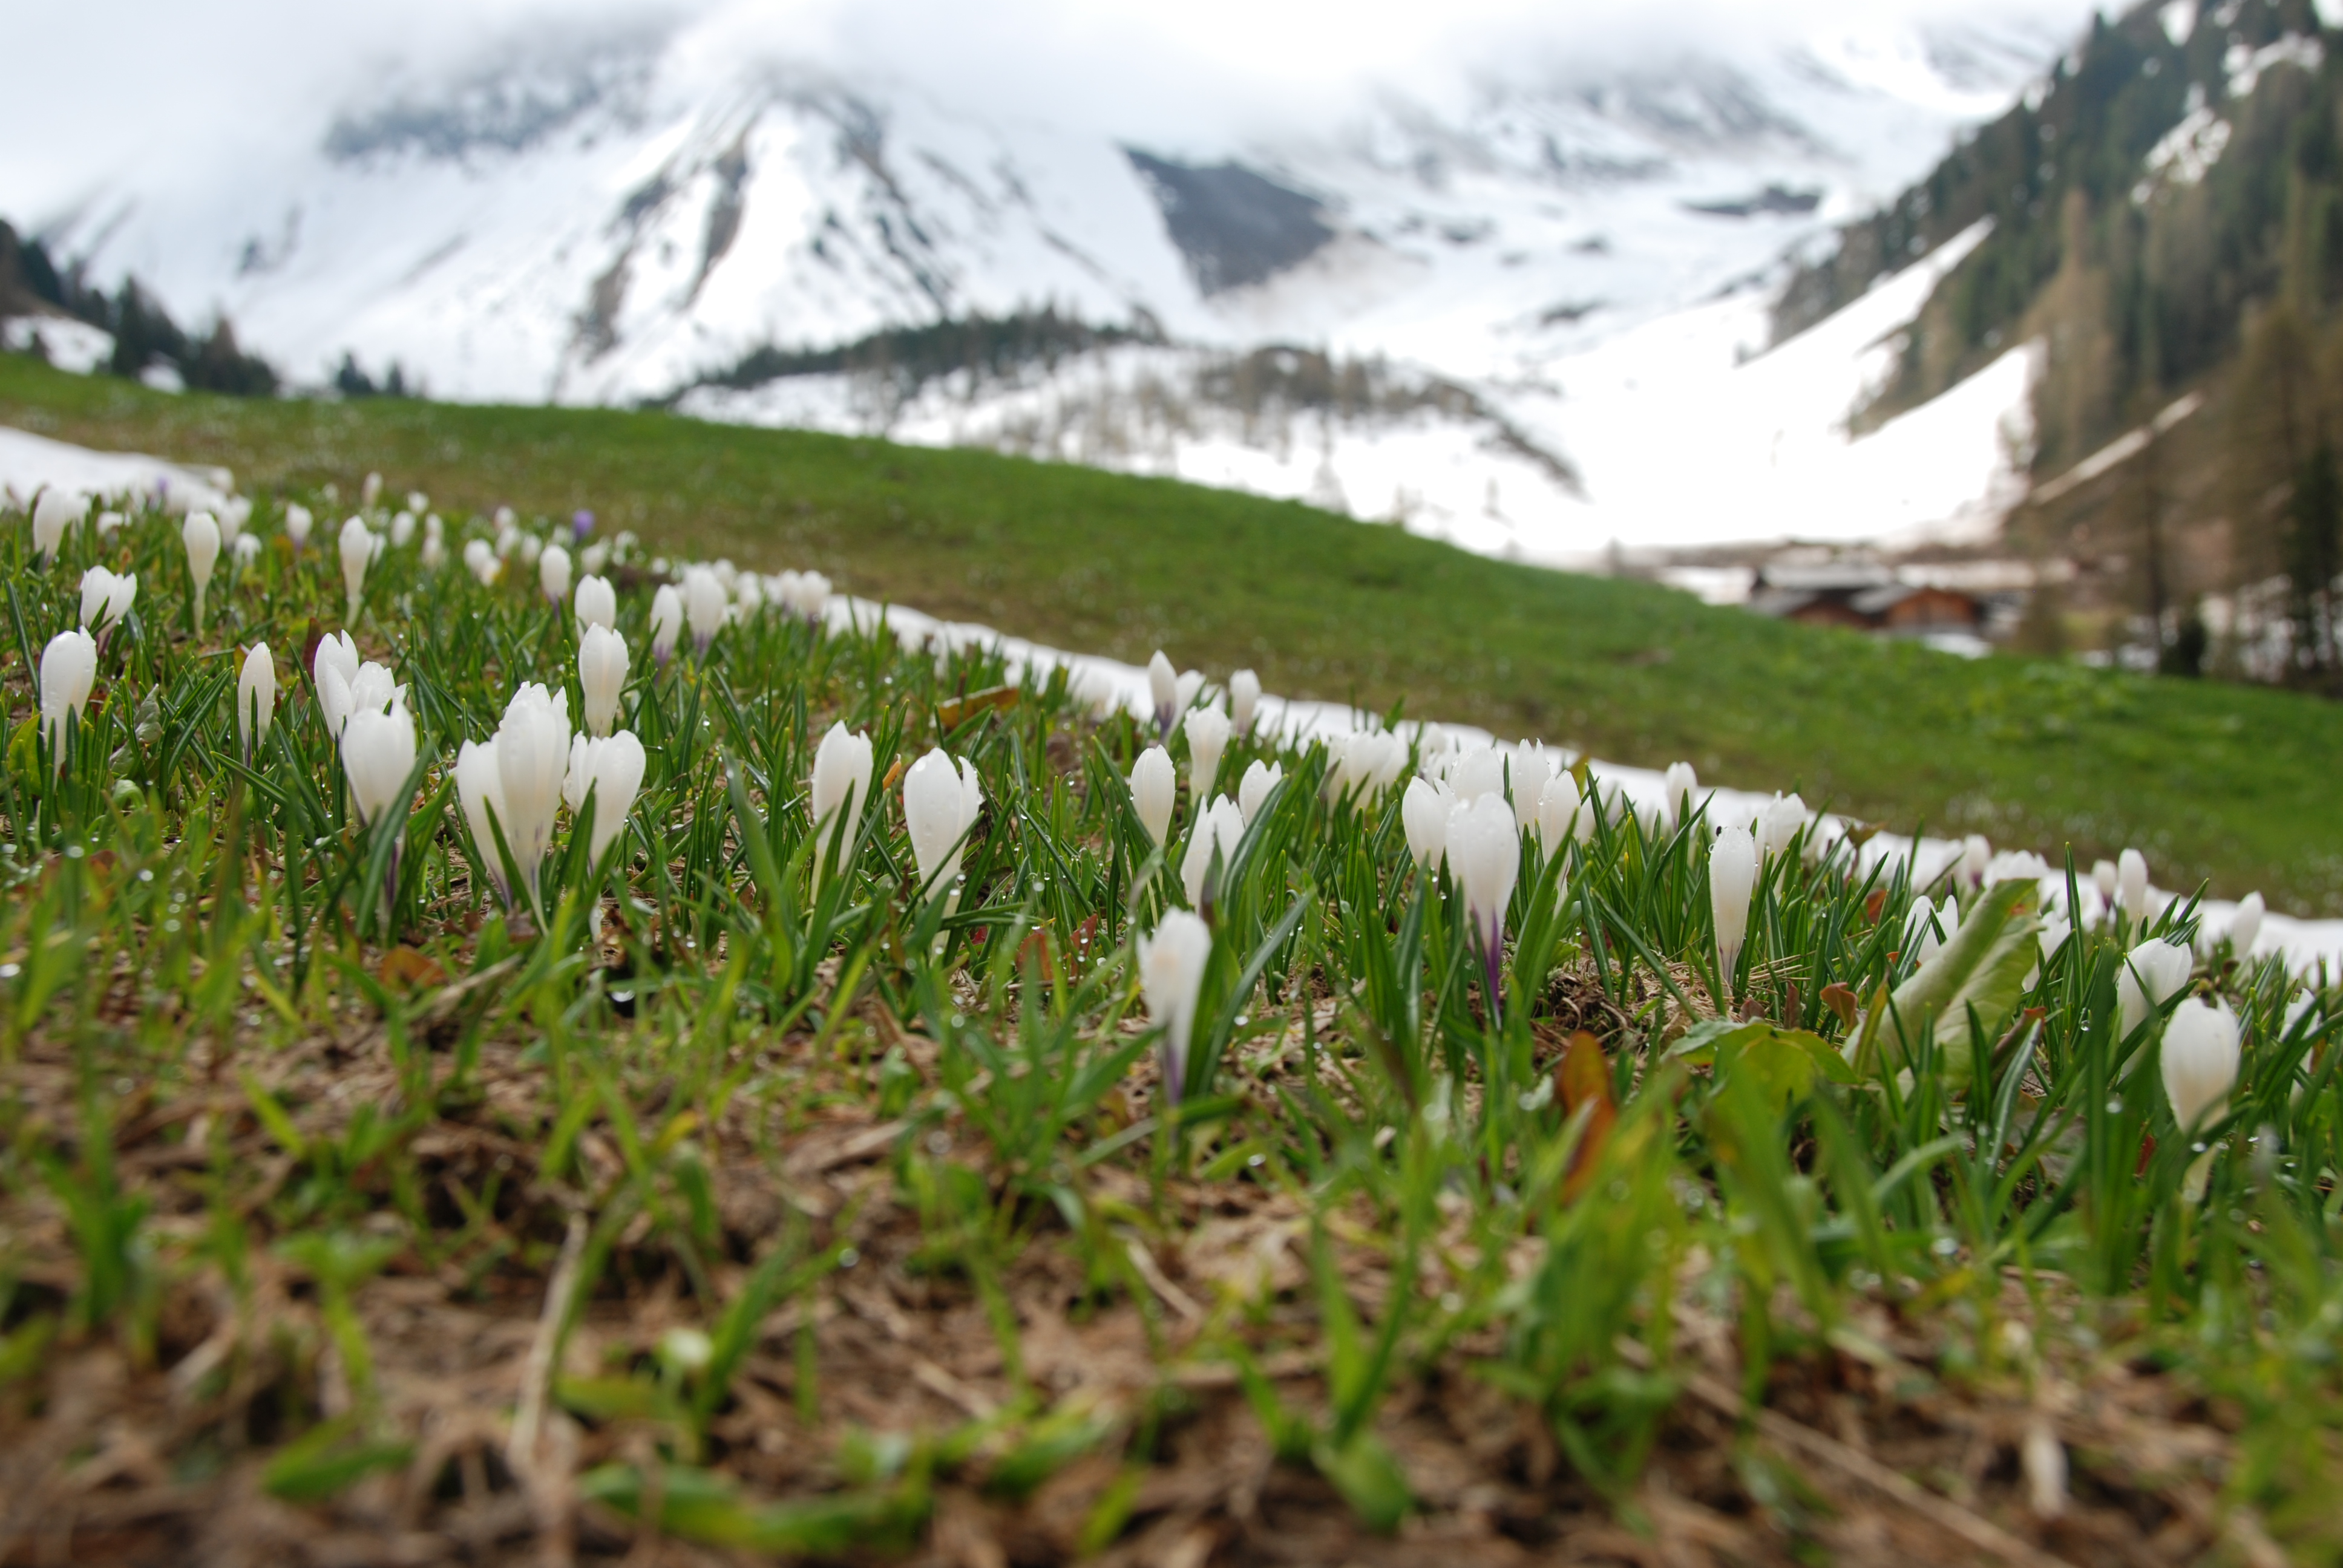 Springtime is coming earlier to the Swiss Alps. Photo: WSF